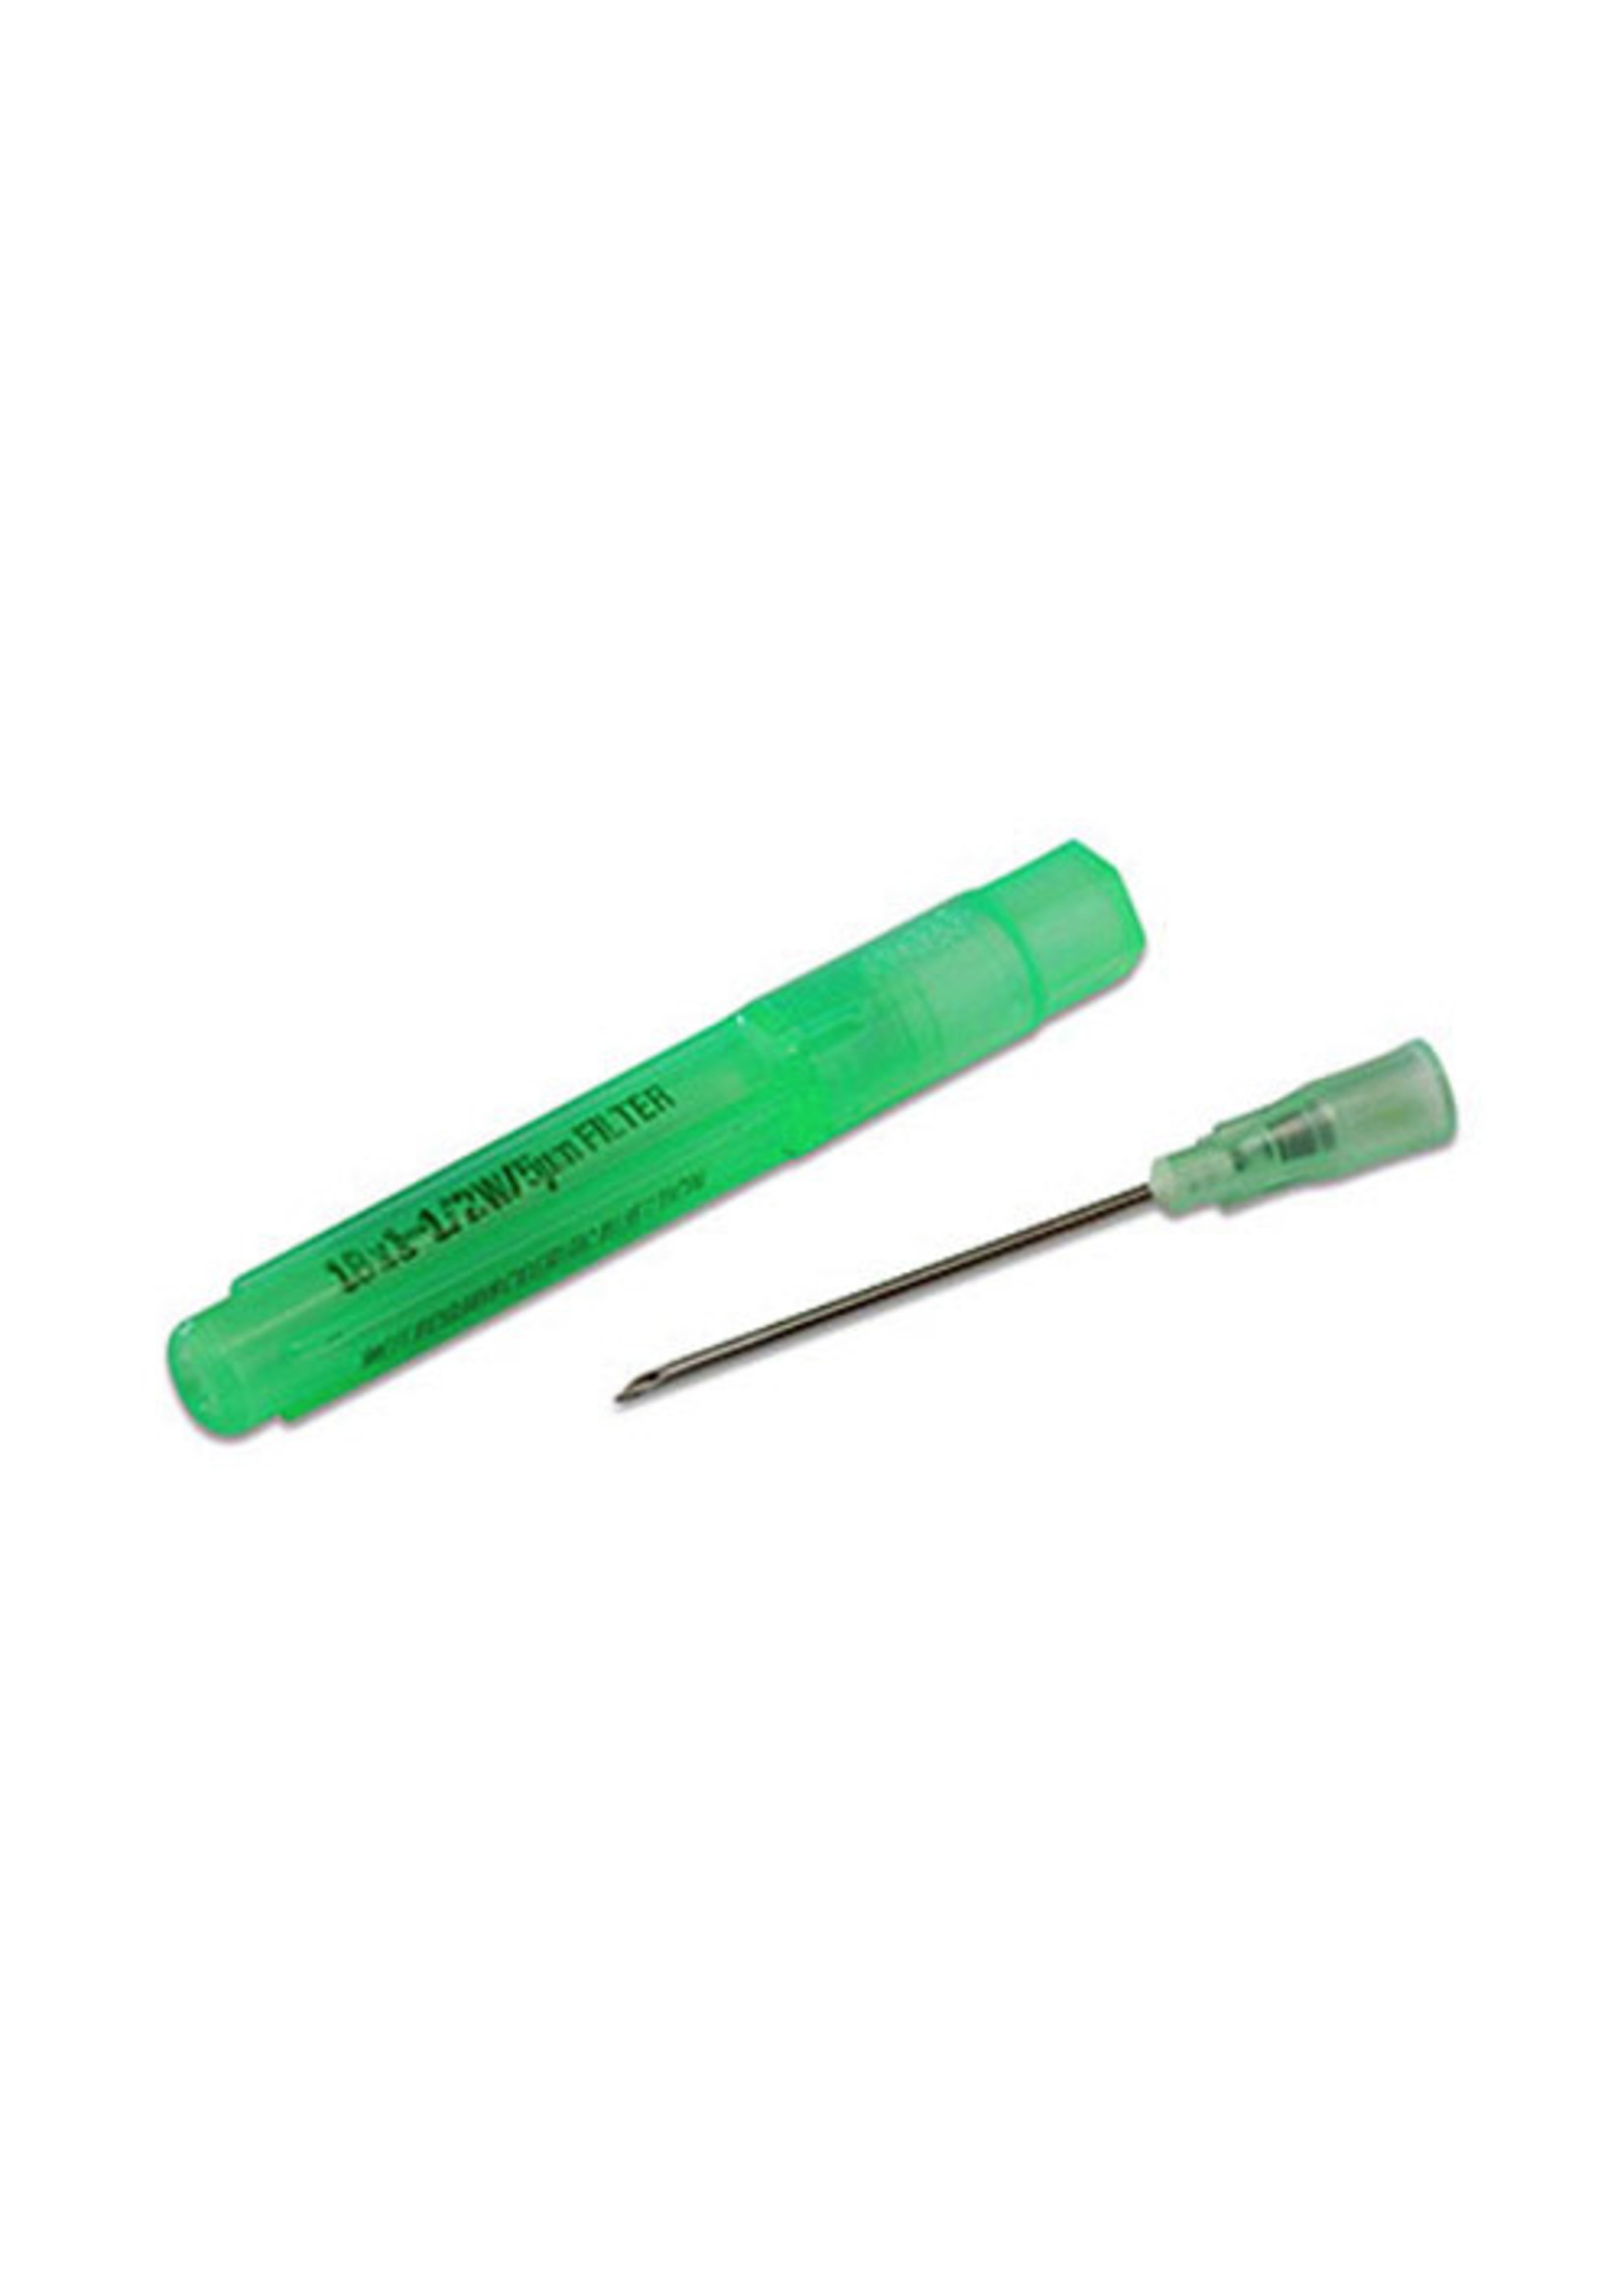 Filtered Needle Hypodermic 18 gx 1.5 In ea.